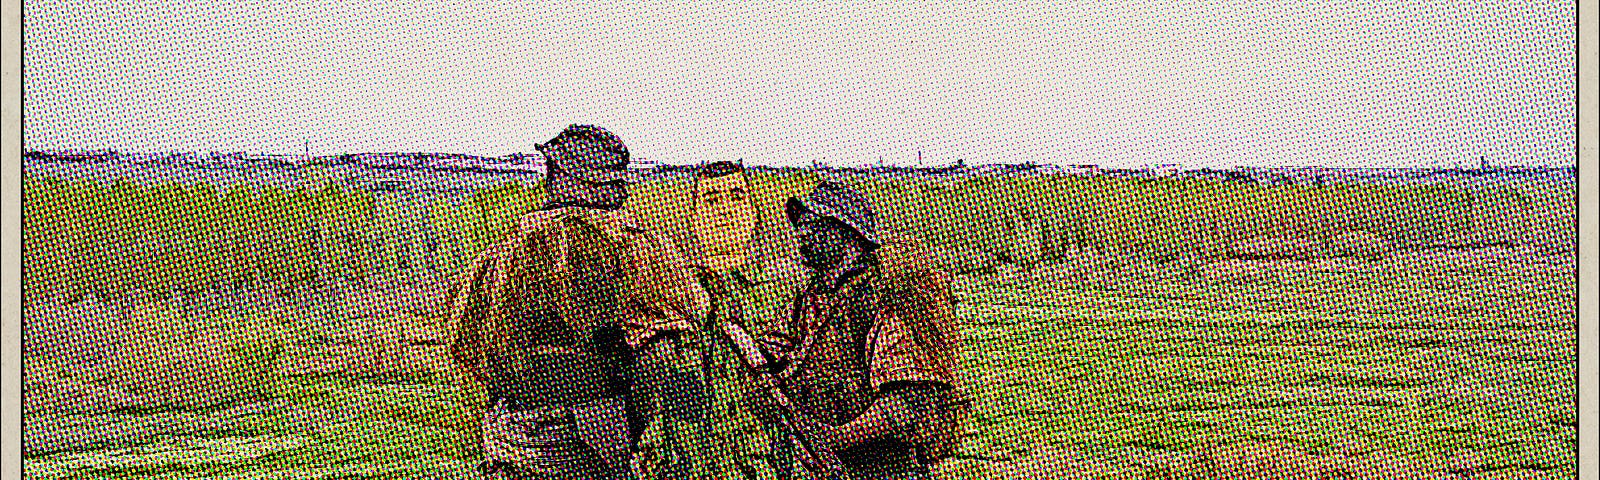 GI Joe in field with real soldiers